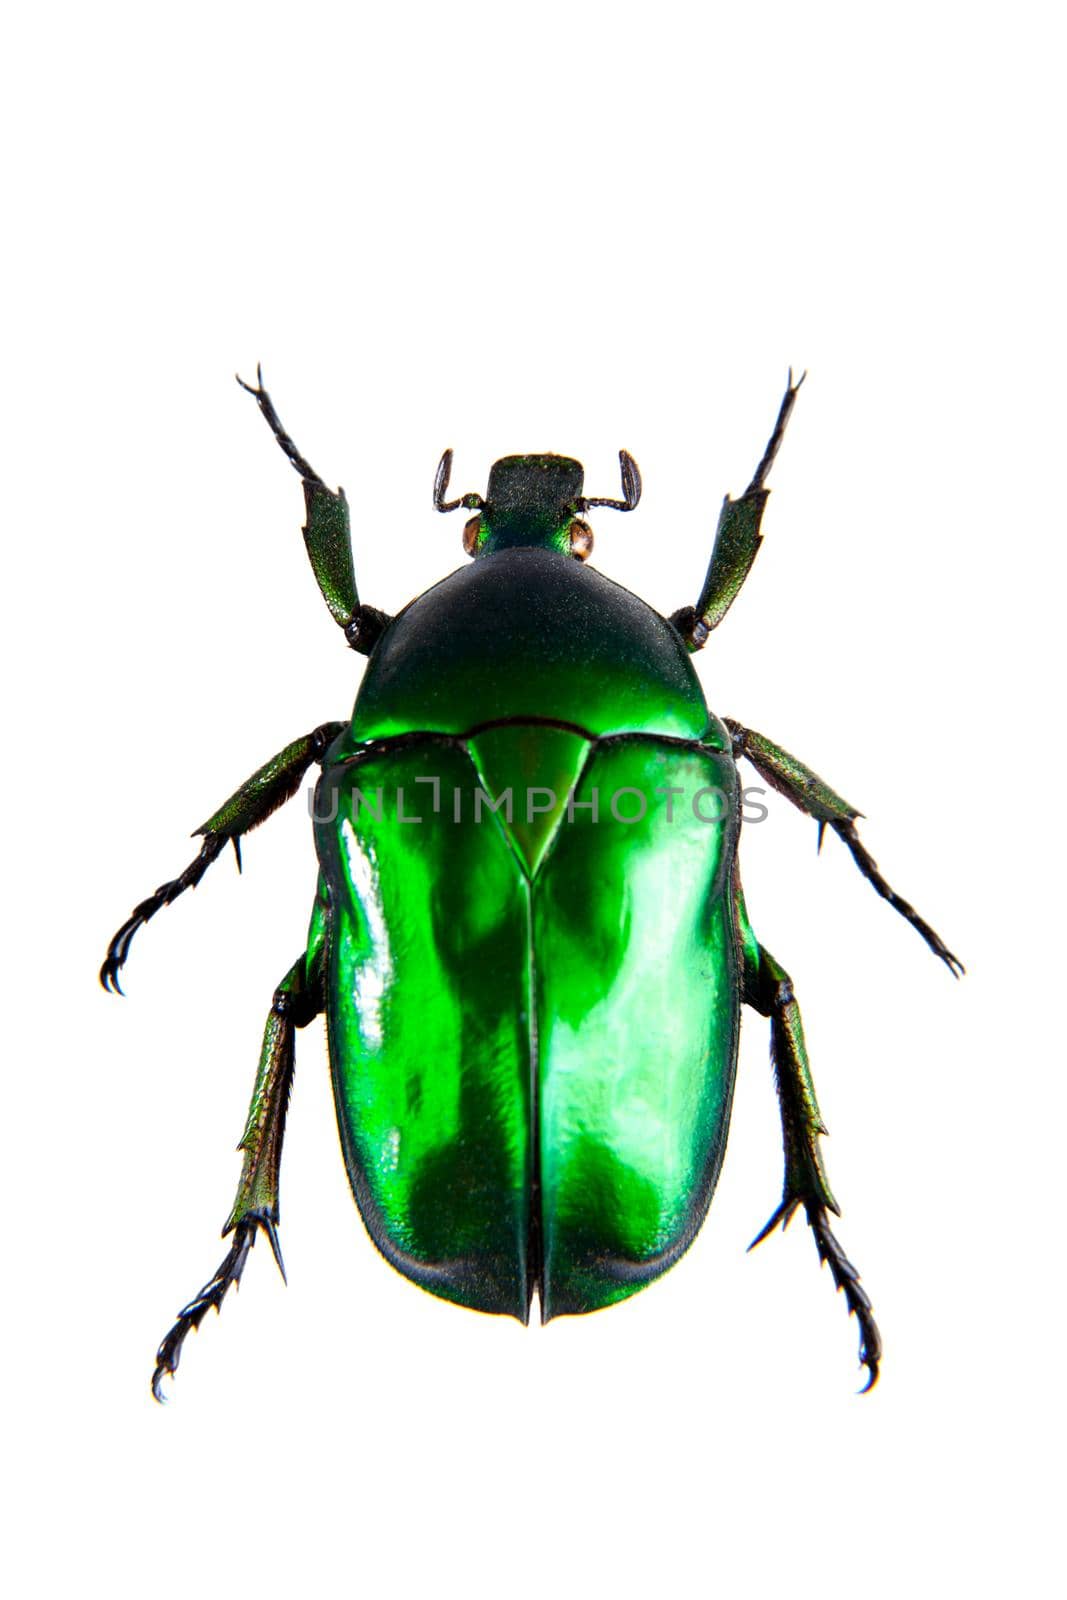 Green beetle on the white background by RosaJay